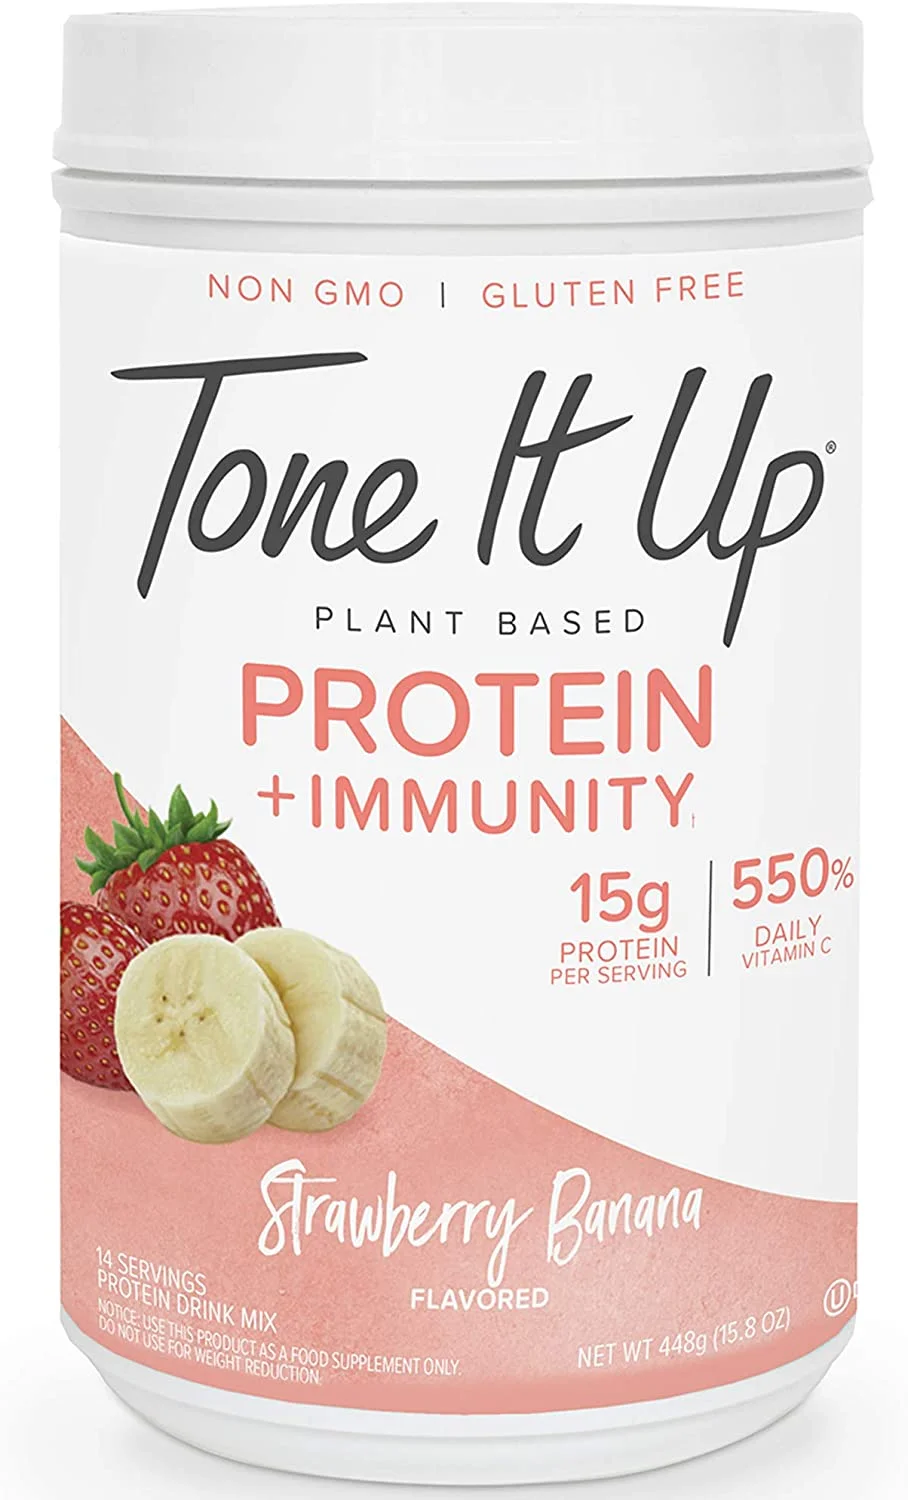 Tone It Up Protein Reviews